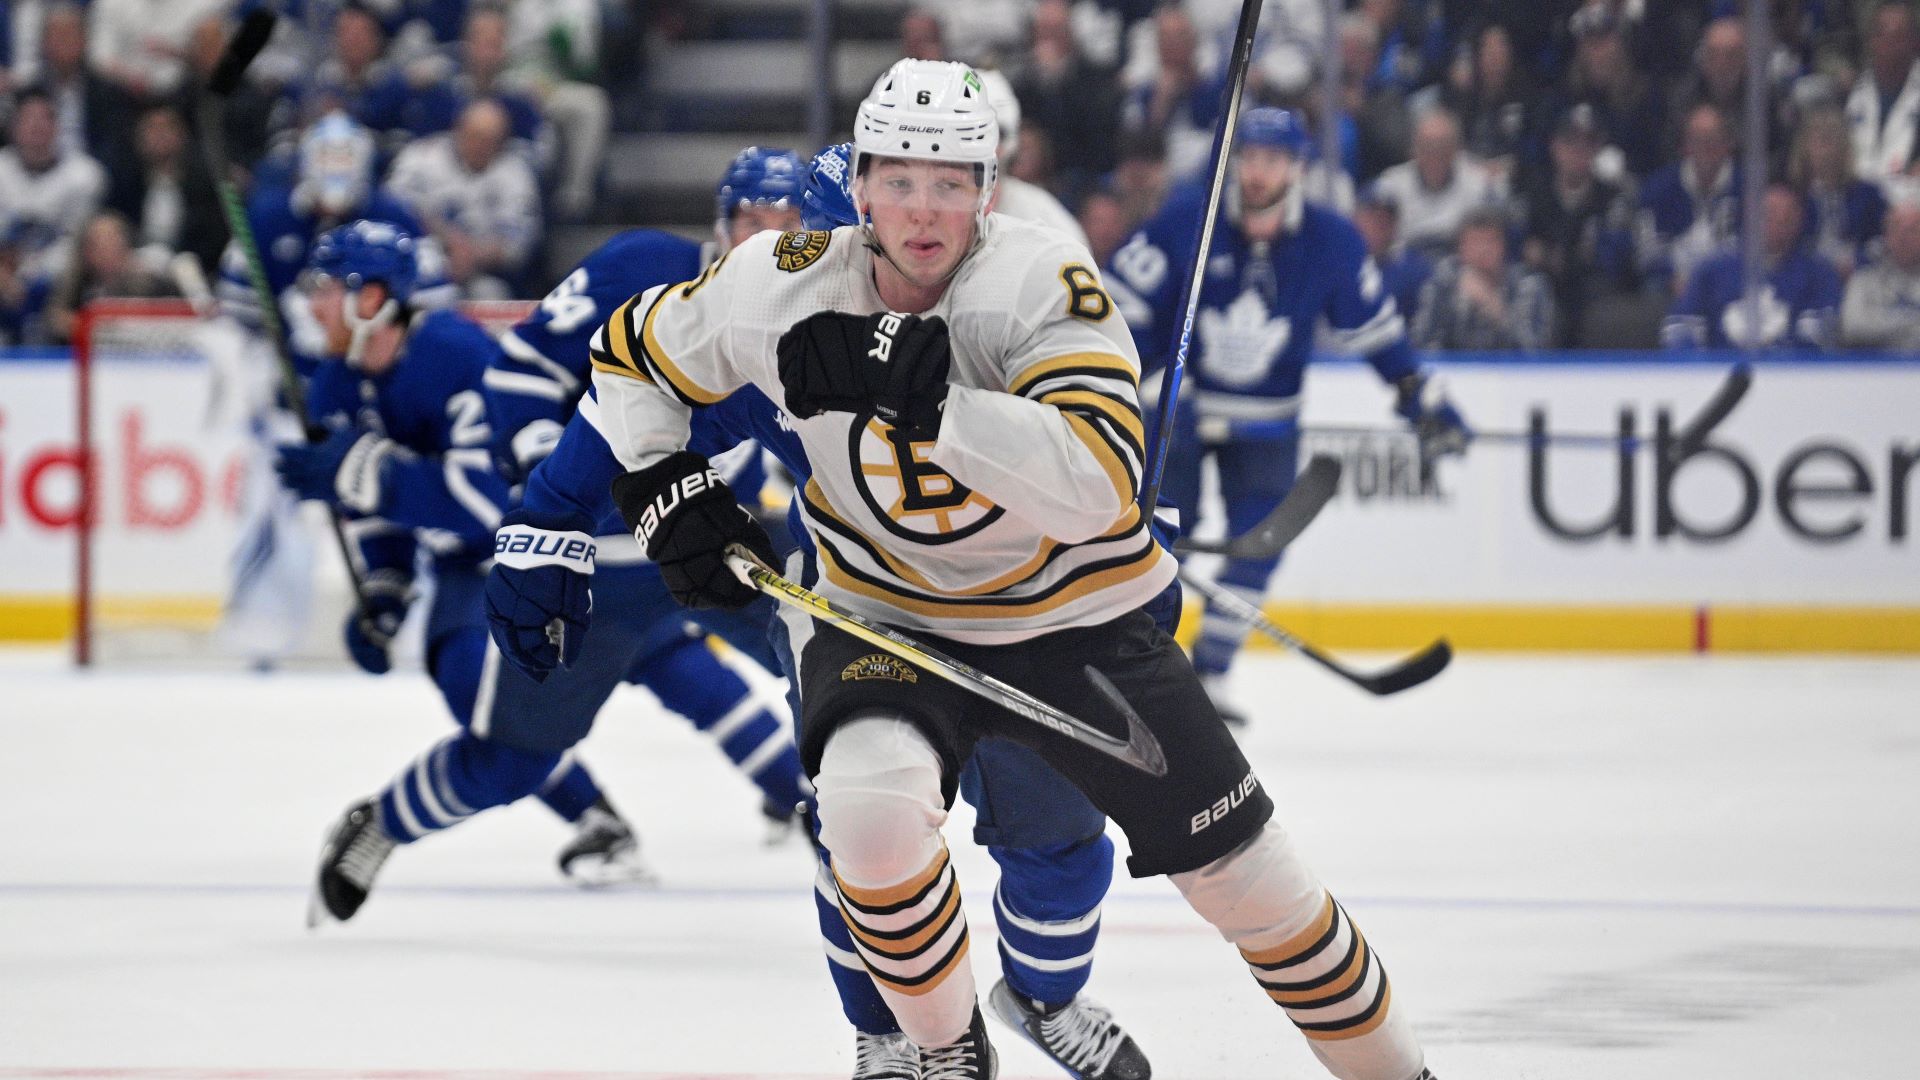 Jim Montgomery Hopes Bruins Defenseman Had ‘Coming Out Party’ Vs.
Leafs